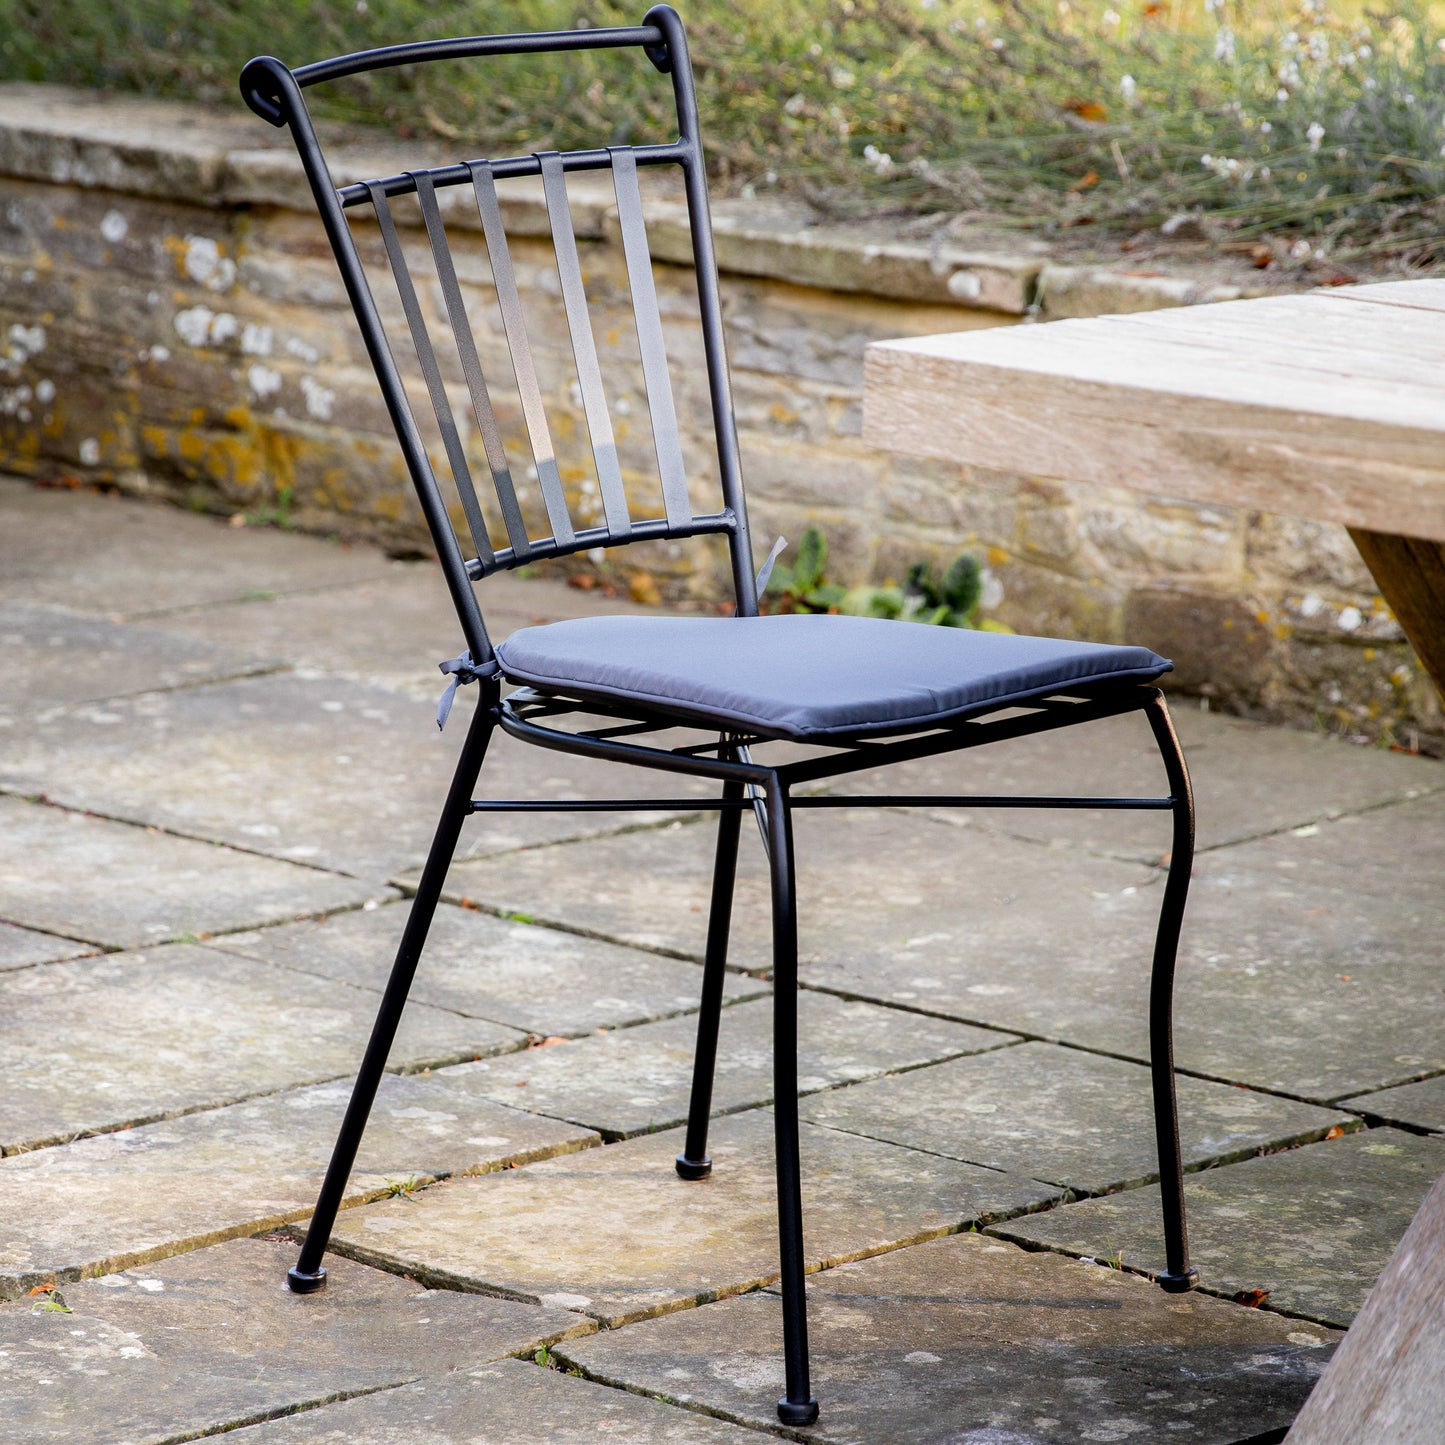 A Colyton Dining Chair from Kikiathome.co.uk, perfect for interior decor.